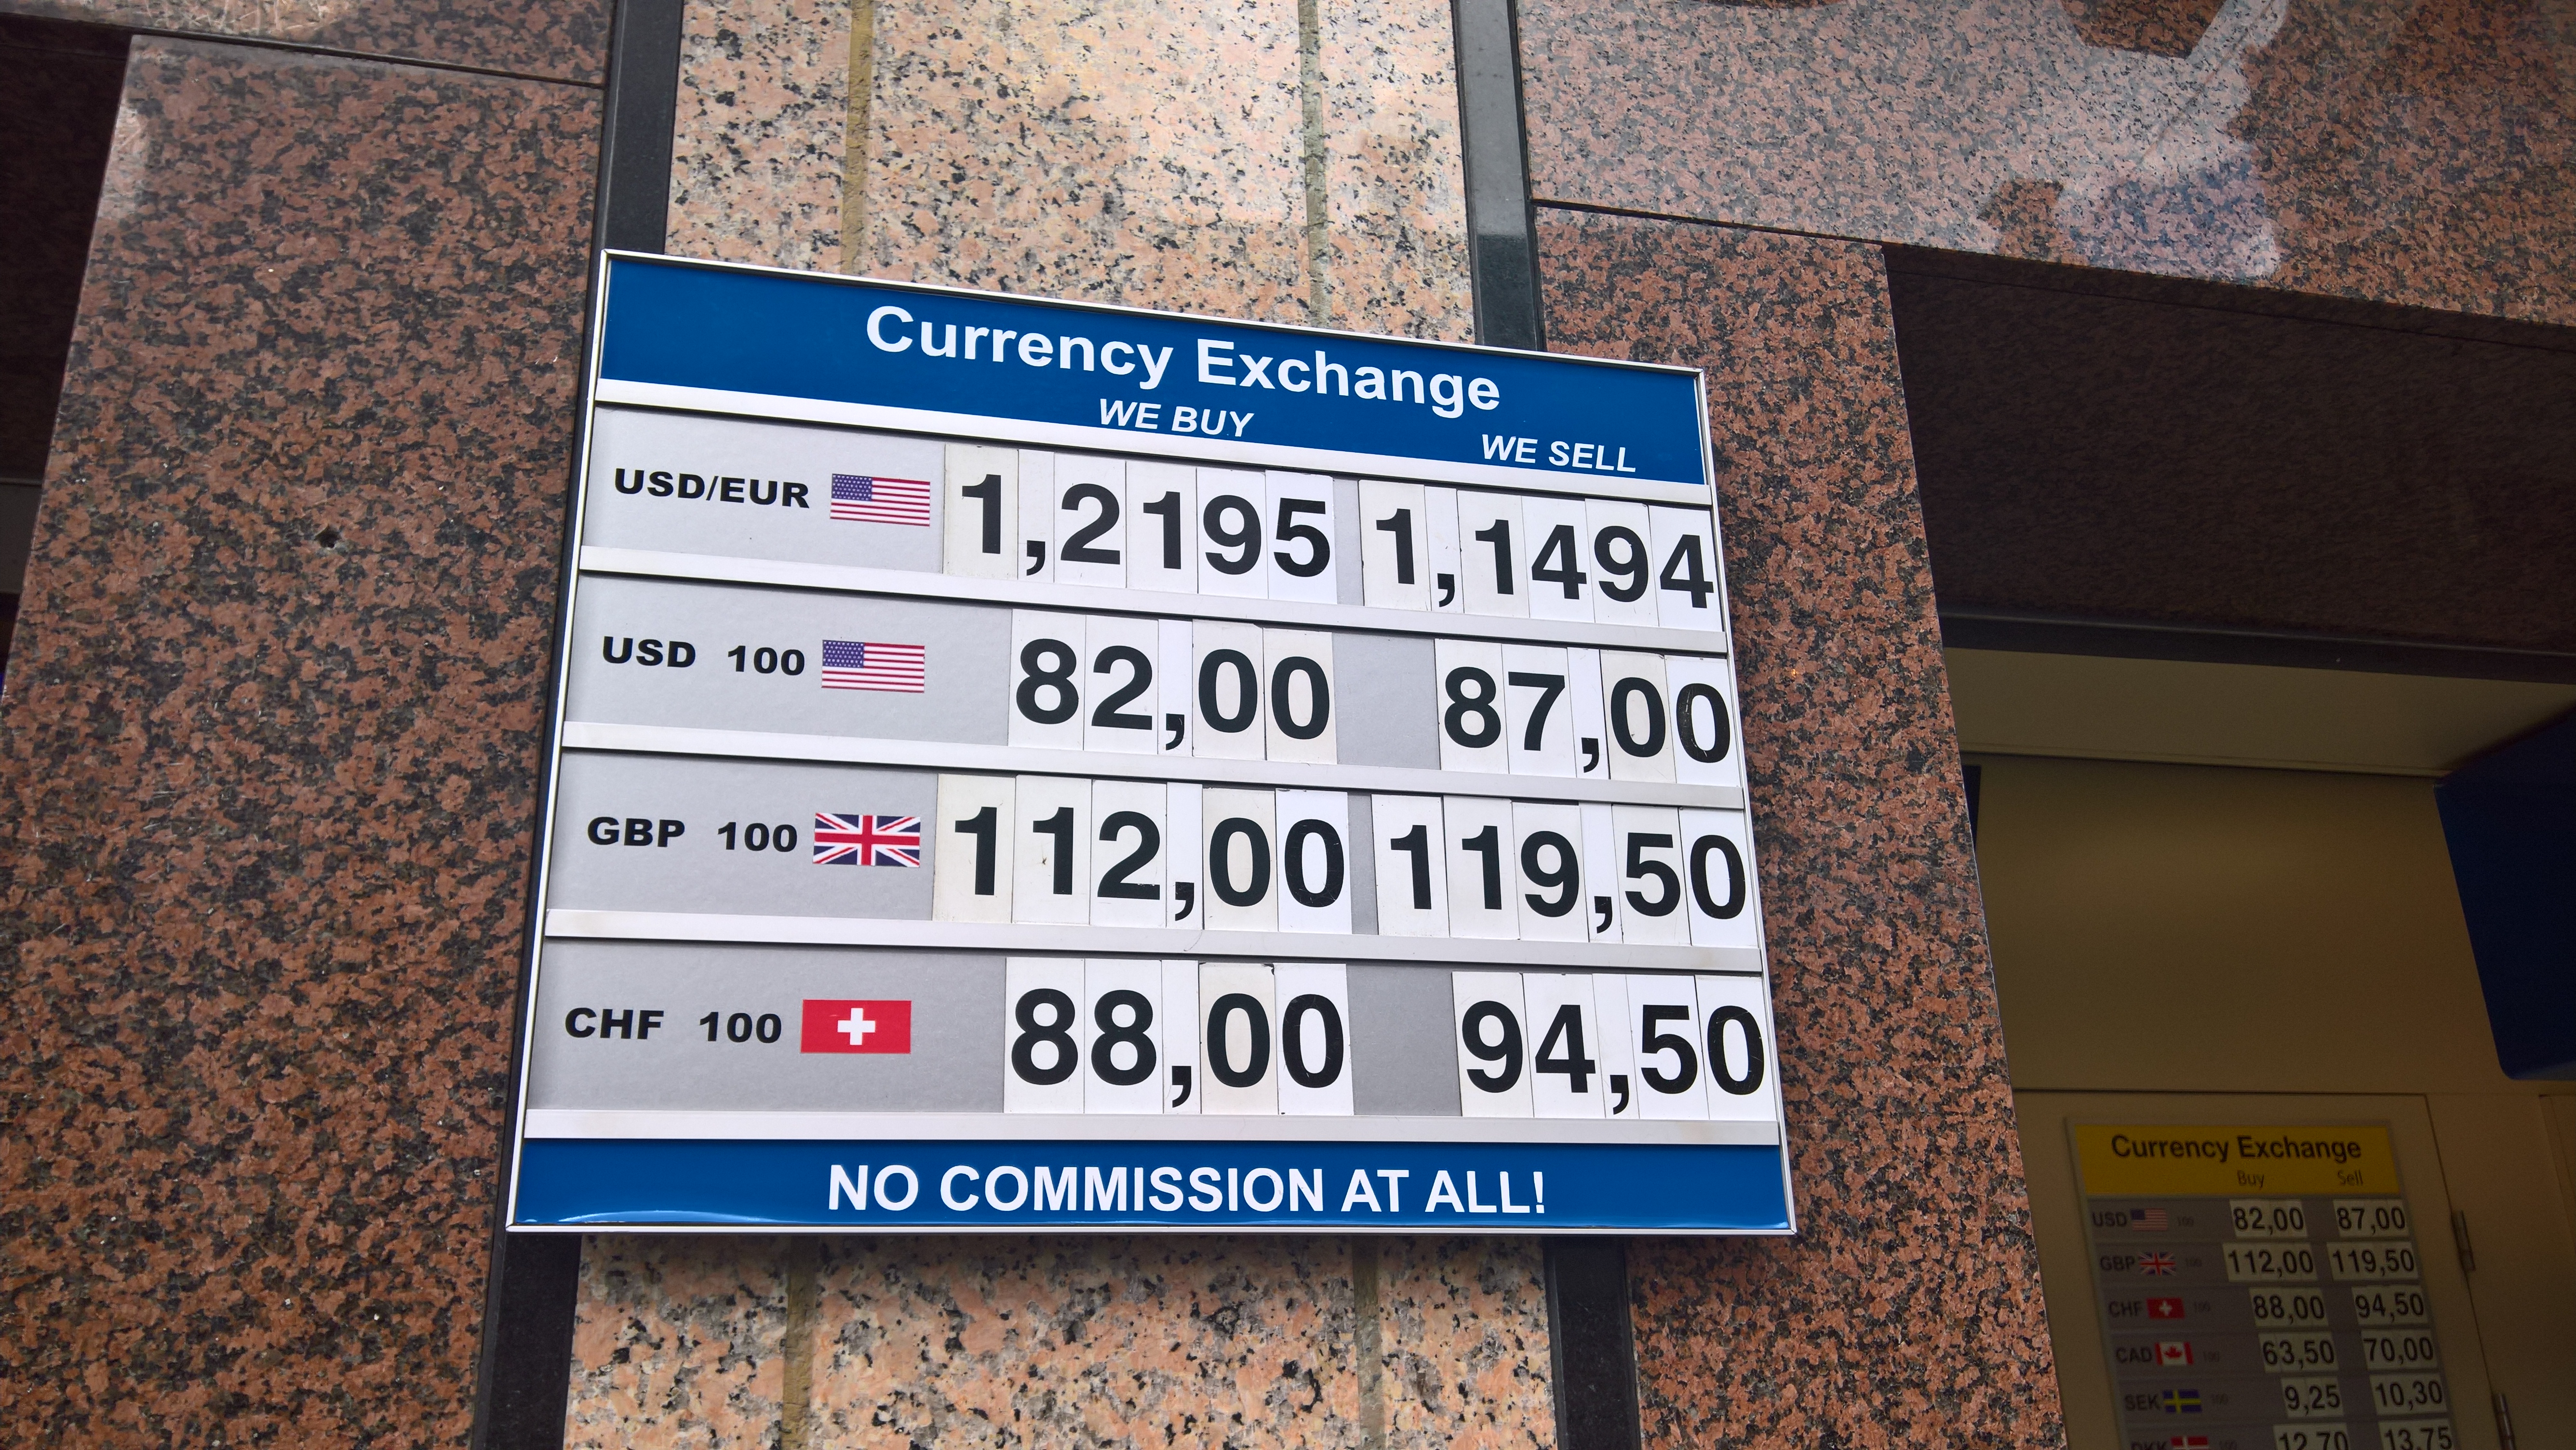 1 USD to ANG - US Dollars to Dutch Guilders (also called Florins) Exchange Rate